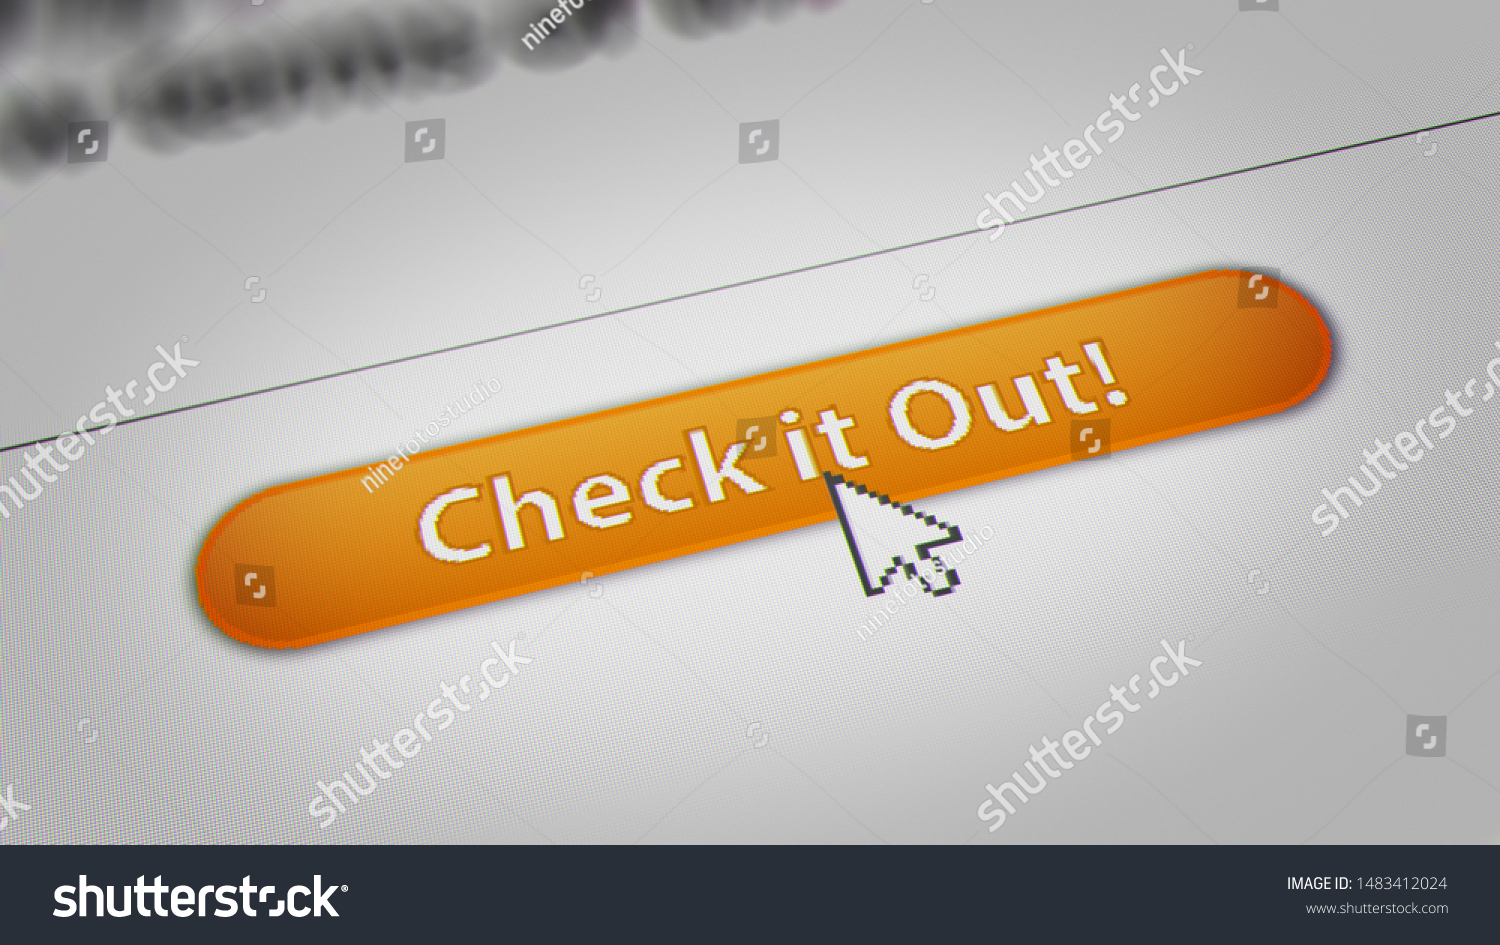 Mouse Cursor Clicking "Check it out " Button on Screen Monitor #1483412024